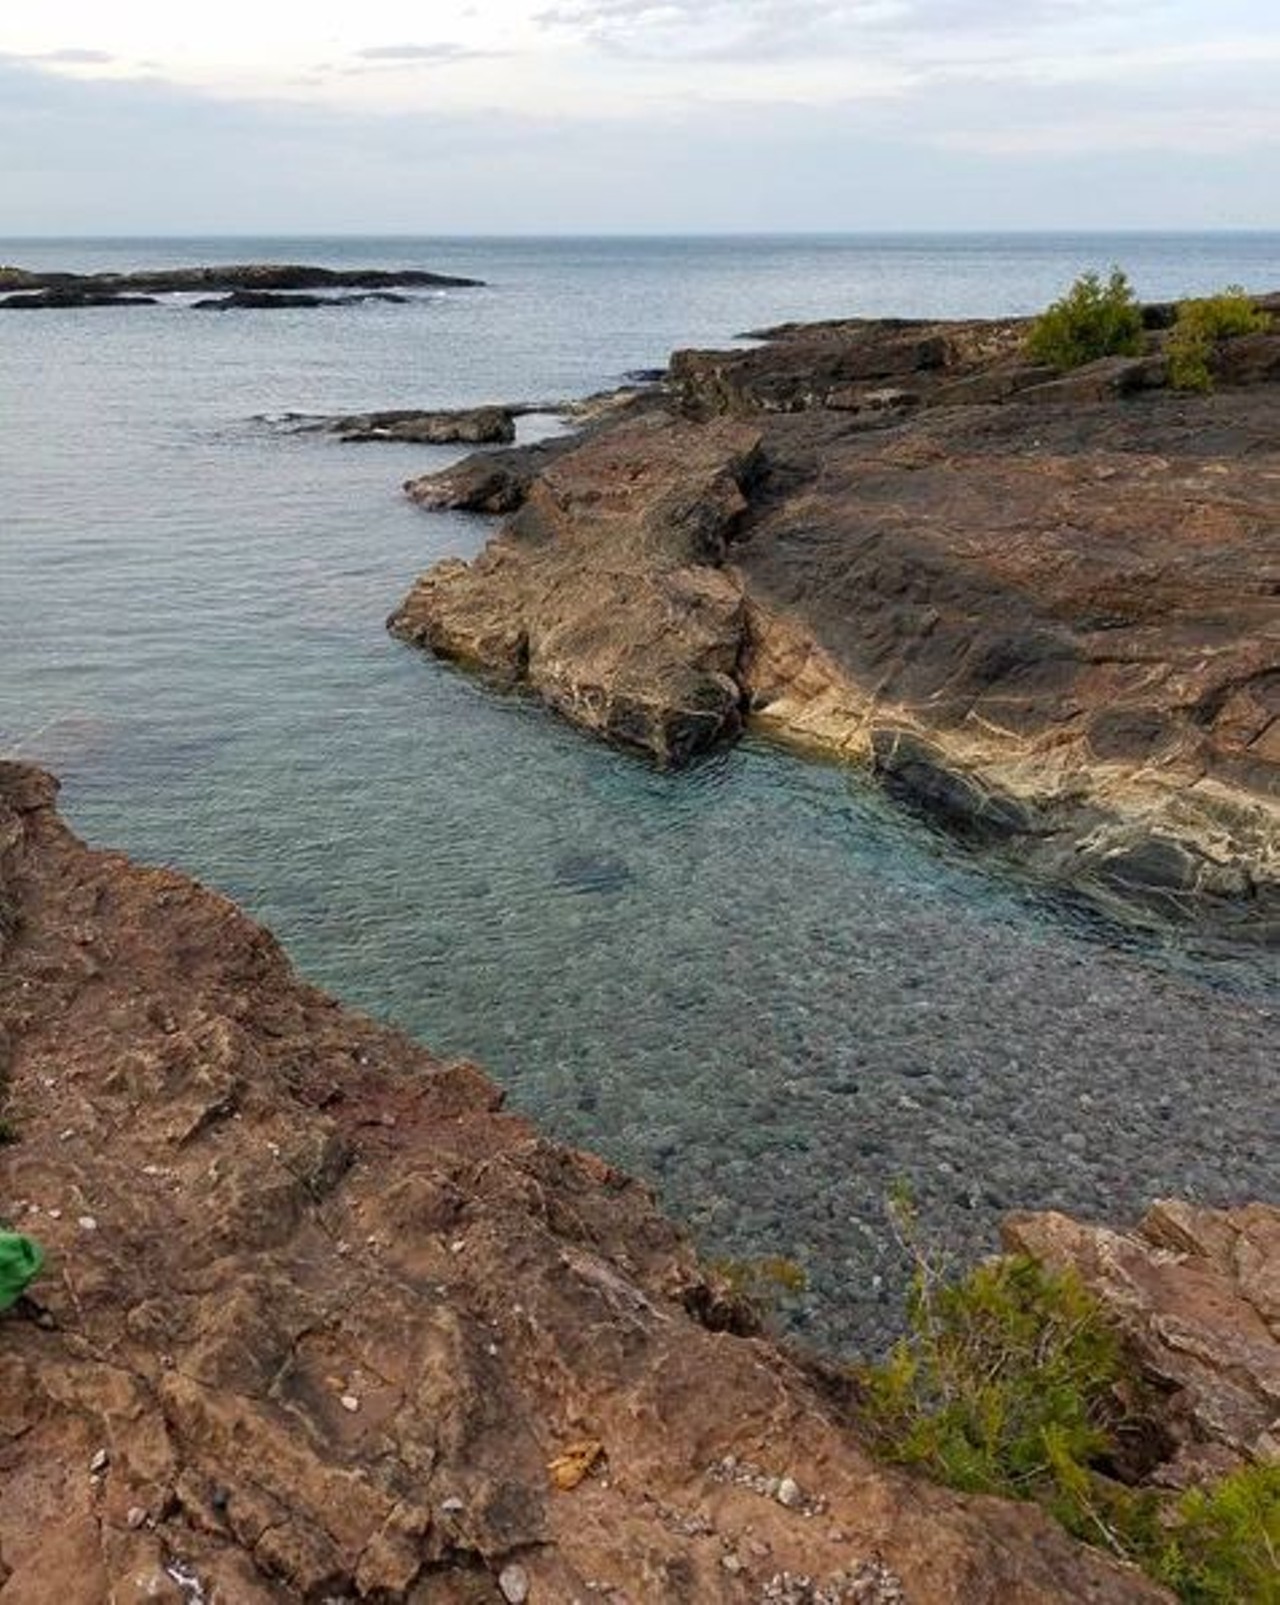 Black Rocks 
Marquette
In addition to expansive hiking trails and beautiful views of northern Michigan, Black Rocks is known as one of the most popular cliff diving spots. If you&#146;re daring enough, jump off of the rocks over 15 feet down into chilly Lake Superior. 
Photo via IG user @peacock_cards_